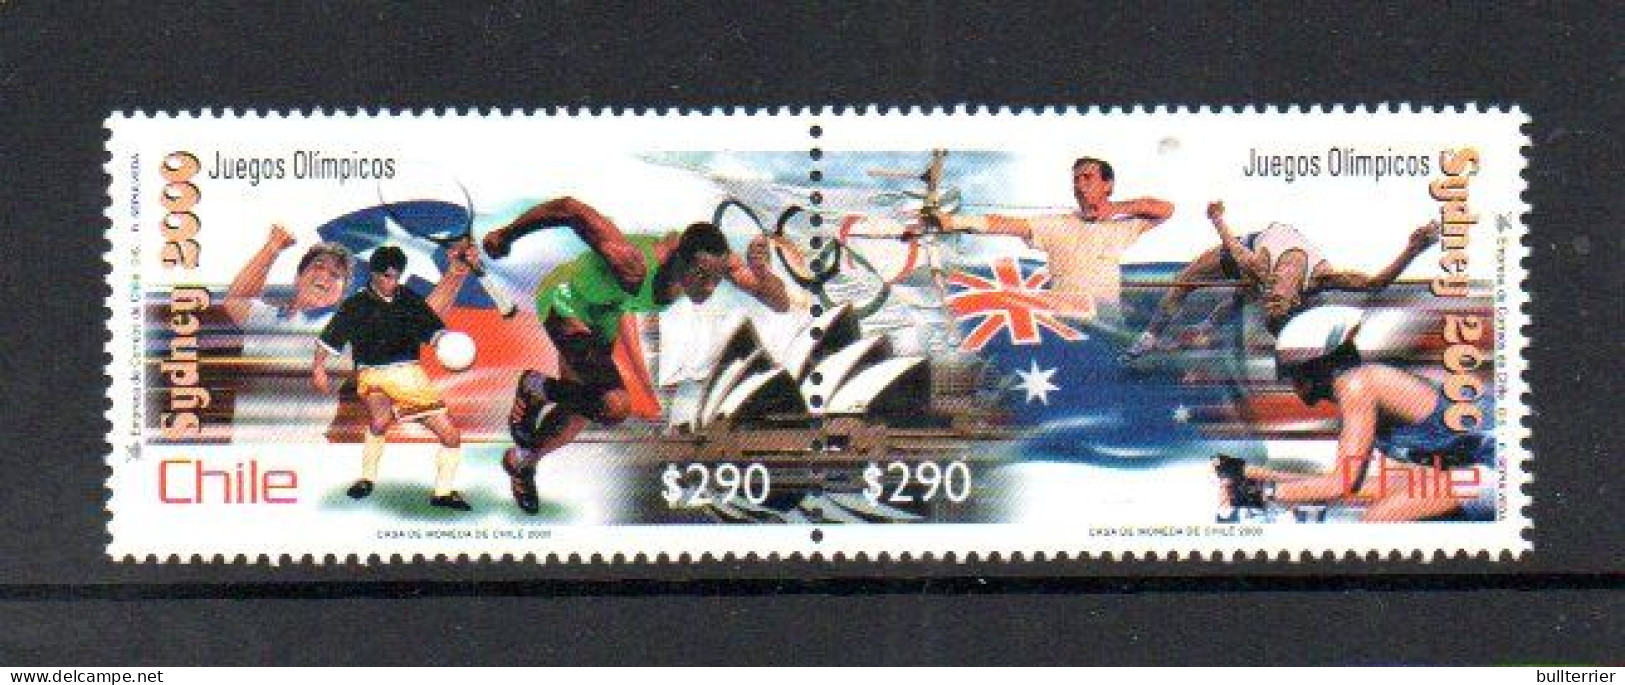 OLYMPICS - CHILE   -  2000 SYDNEY OLYMPICS SET OF 2 IN PAIR   MINT NEVER HINGED - Zomer 2000: Sydney